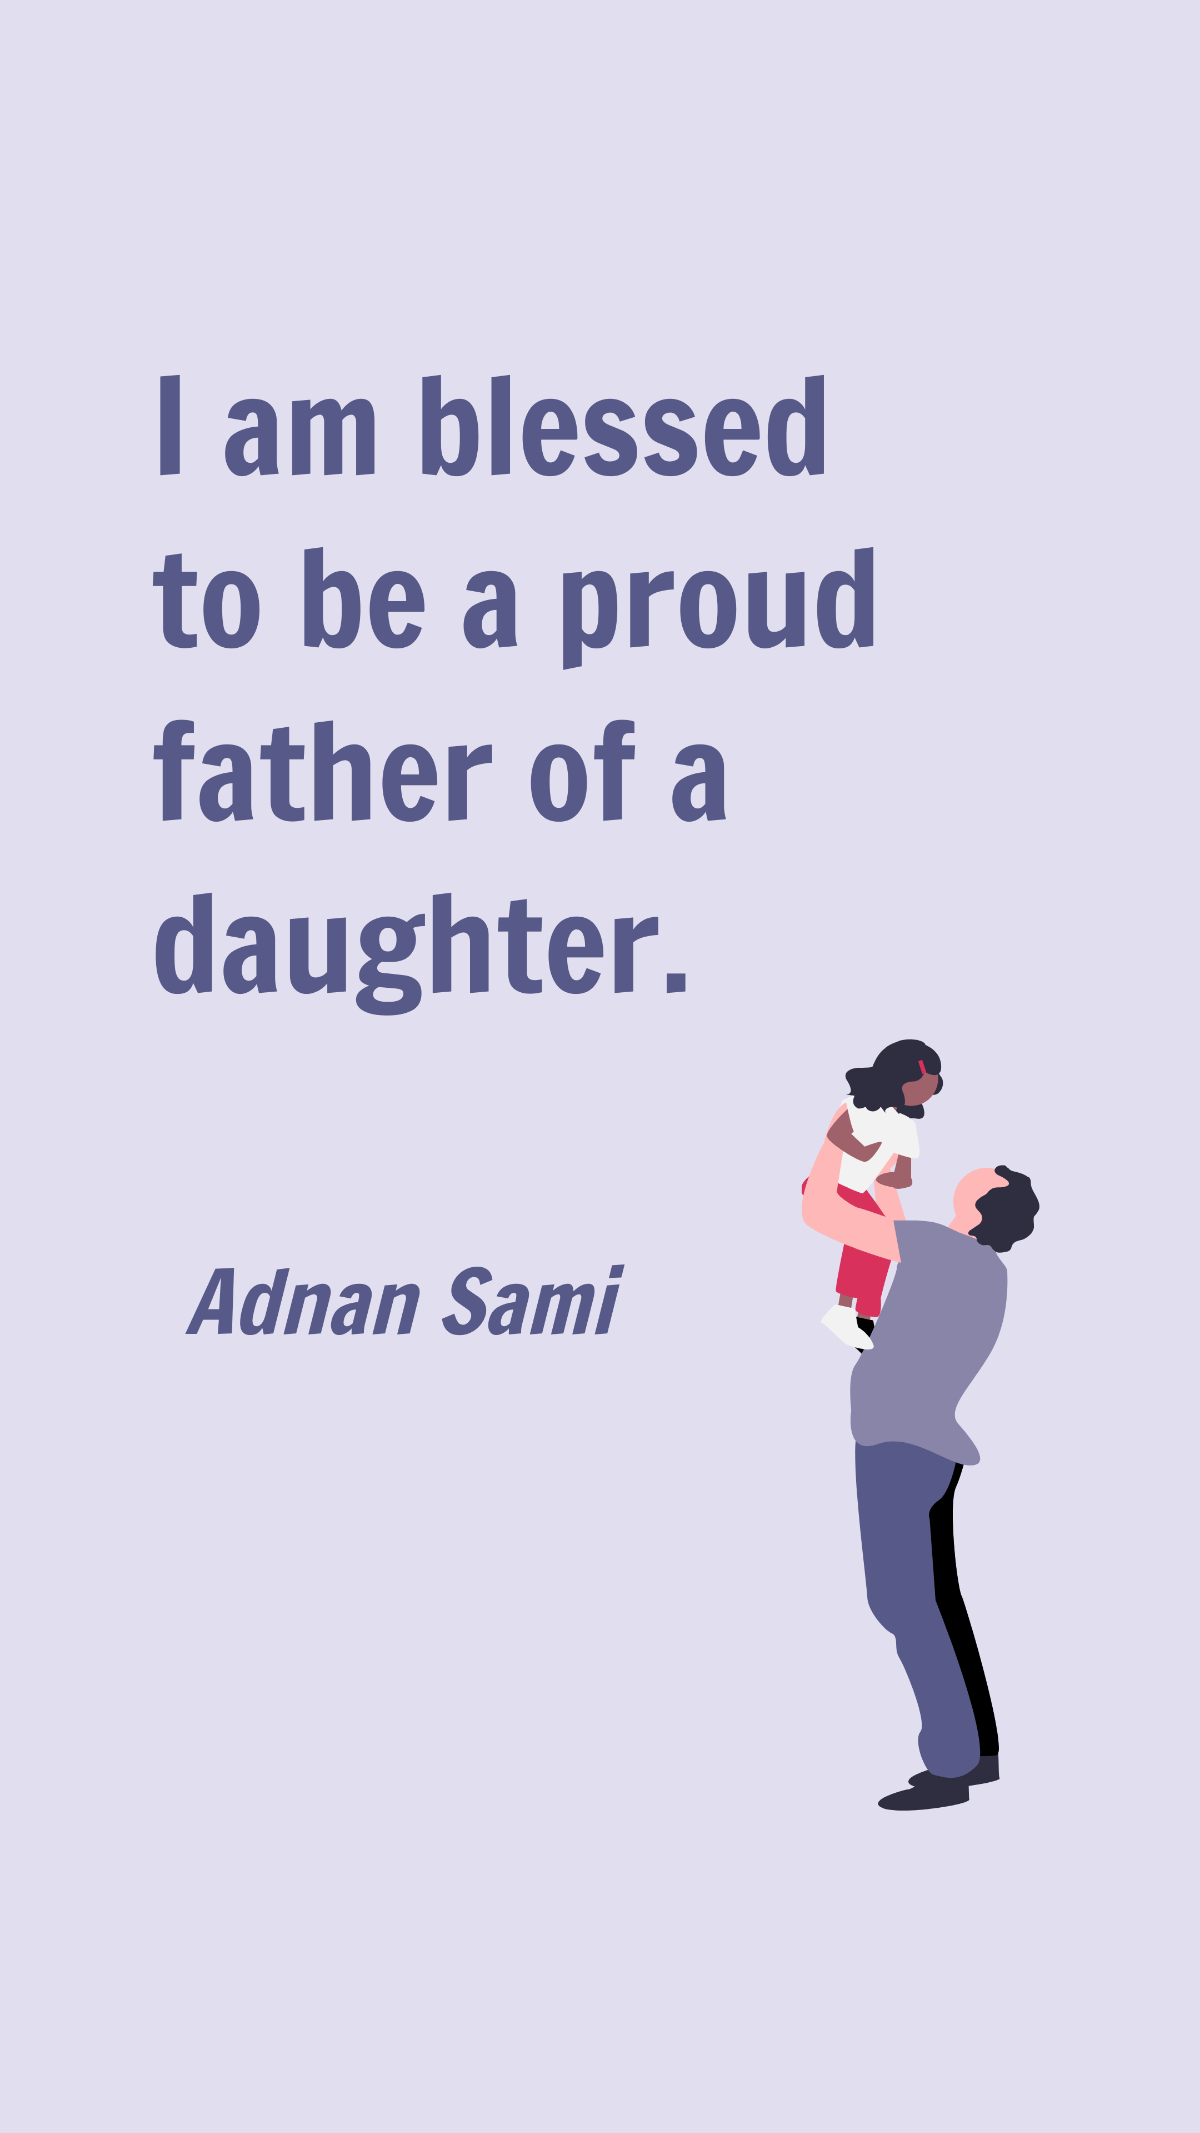 Adnan Sami - I am blessed to be a proud father of a daughter. Template